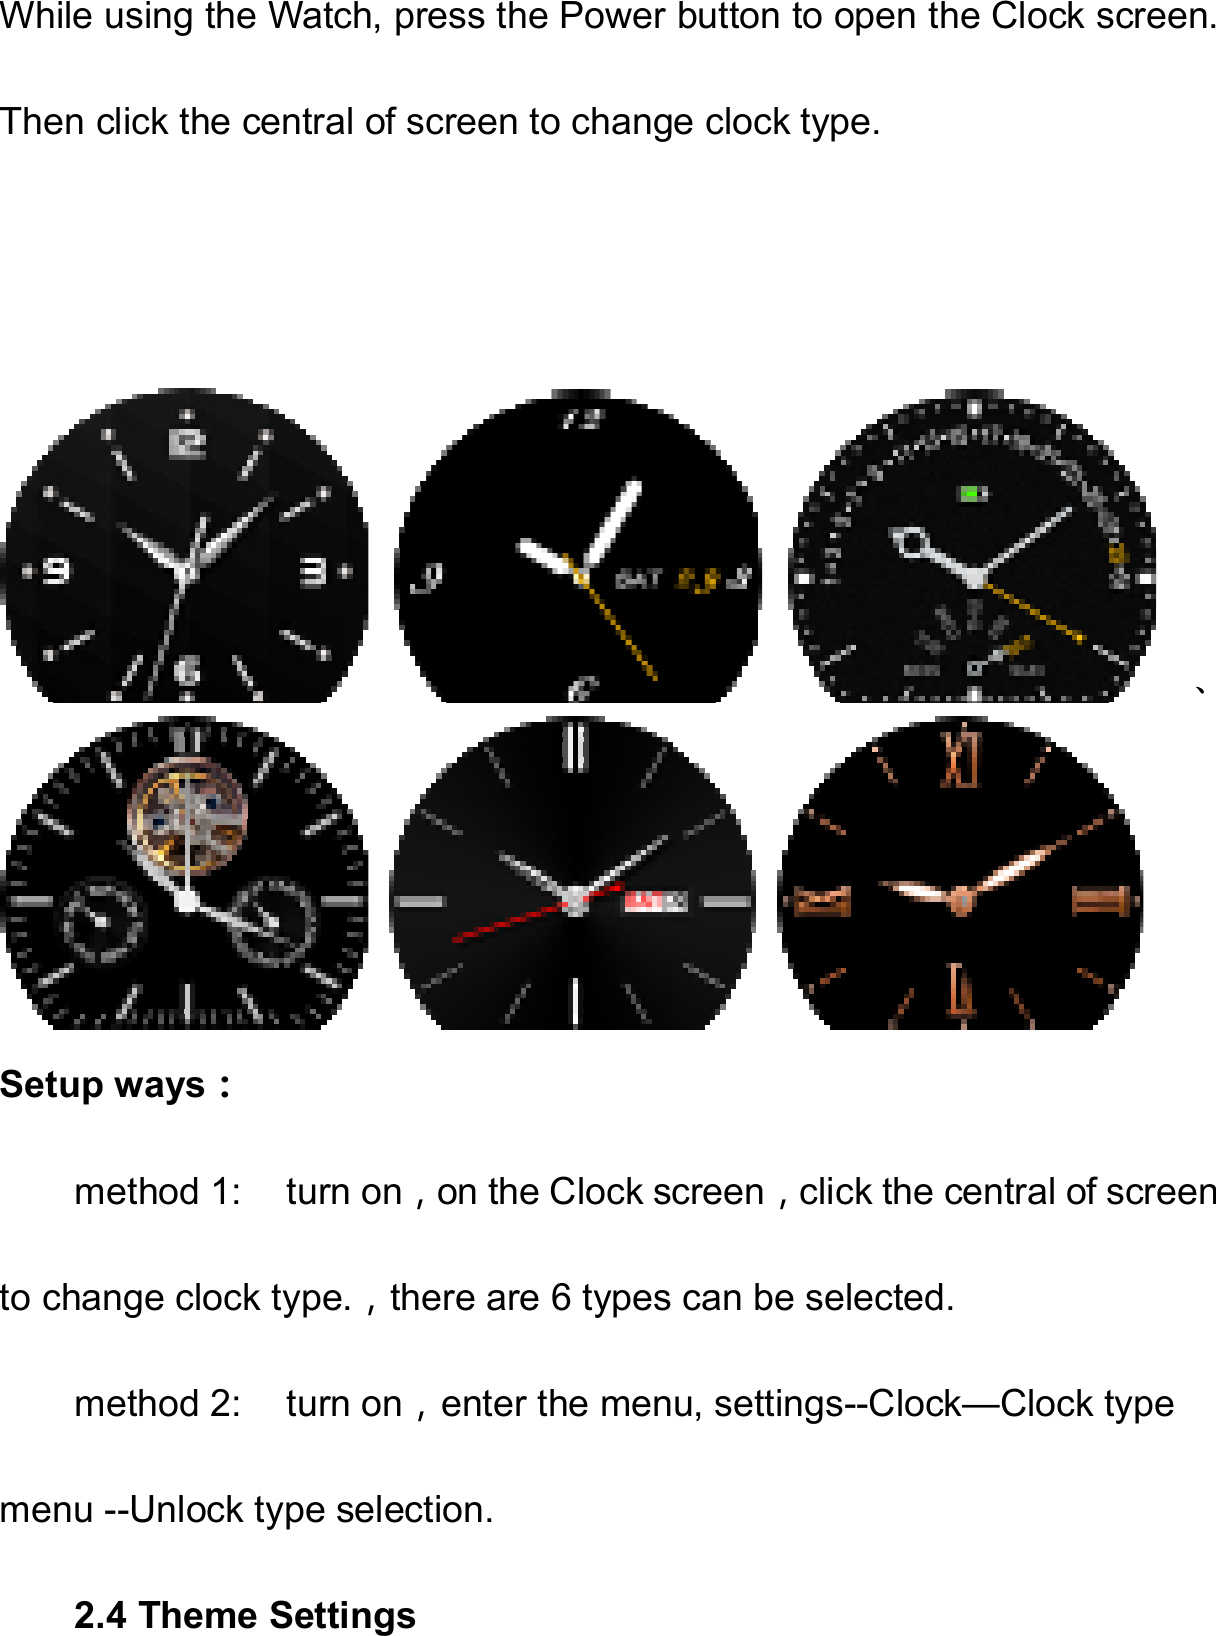   While using the Watch, press the Power button to open the Clock screen. Then click the central of screen to change clock type.         、Setup ways： method 1:    turn on，on the Clock screen，click the central of screen to change clock type.，there are 6 types can be selected. method 2:  turn on，enter the menu, settings--Clock—Clock type menu --Unlock type selection. 2.4 Theme Settings 